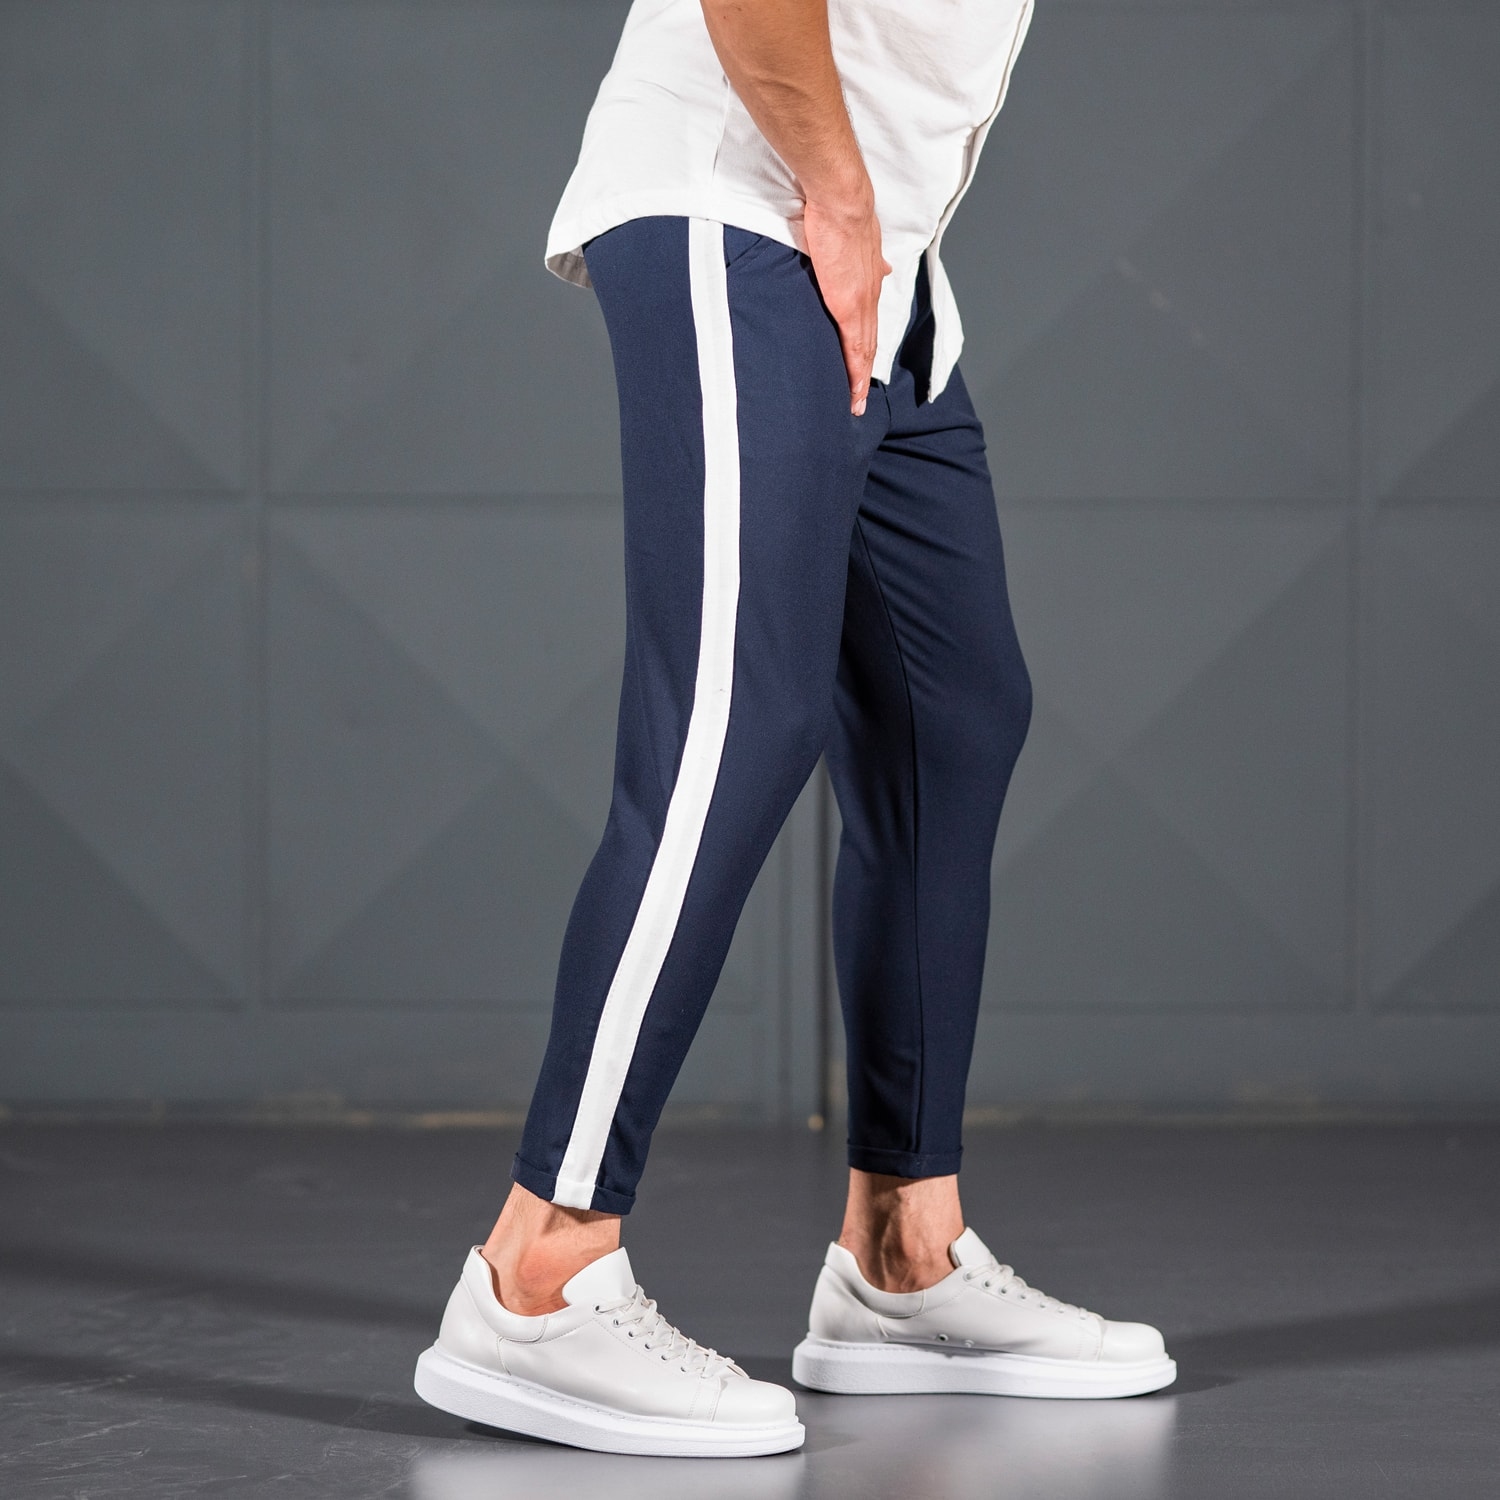 navy blue and white striped pants